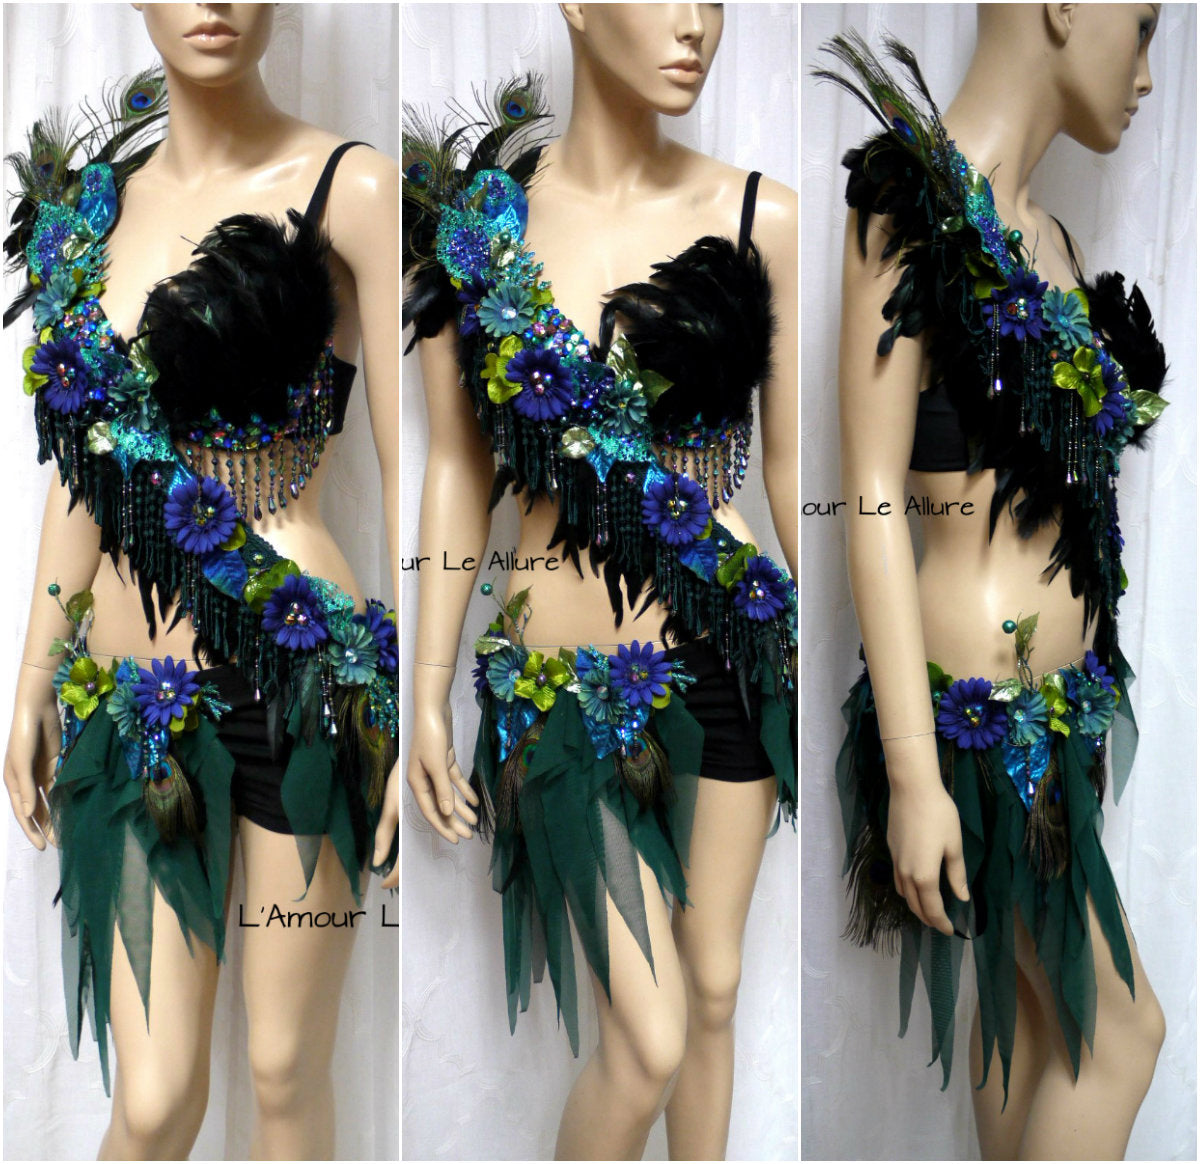 Peacock Feather Costume Rave Bra and Skirt Bottom · L'Amour Le